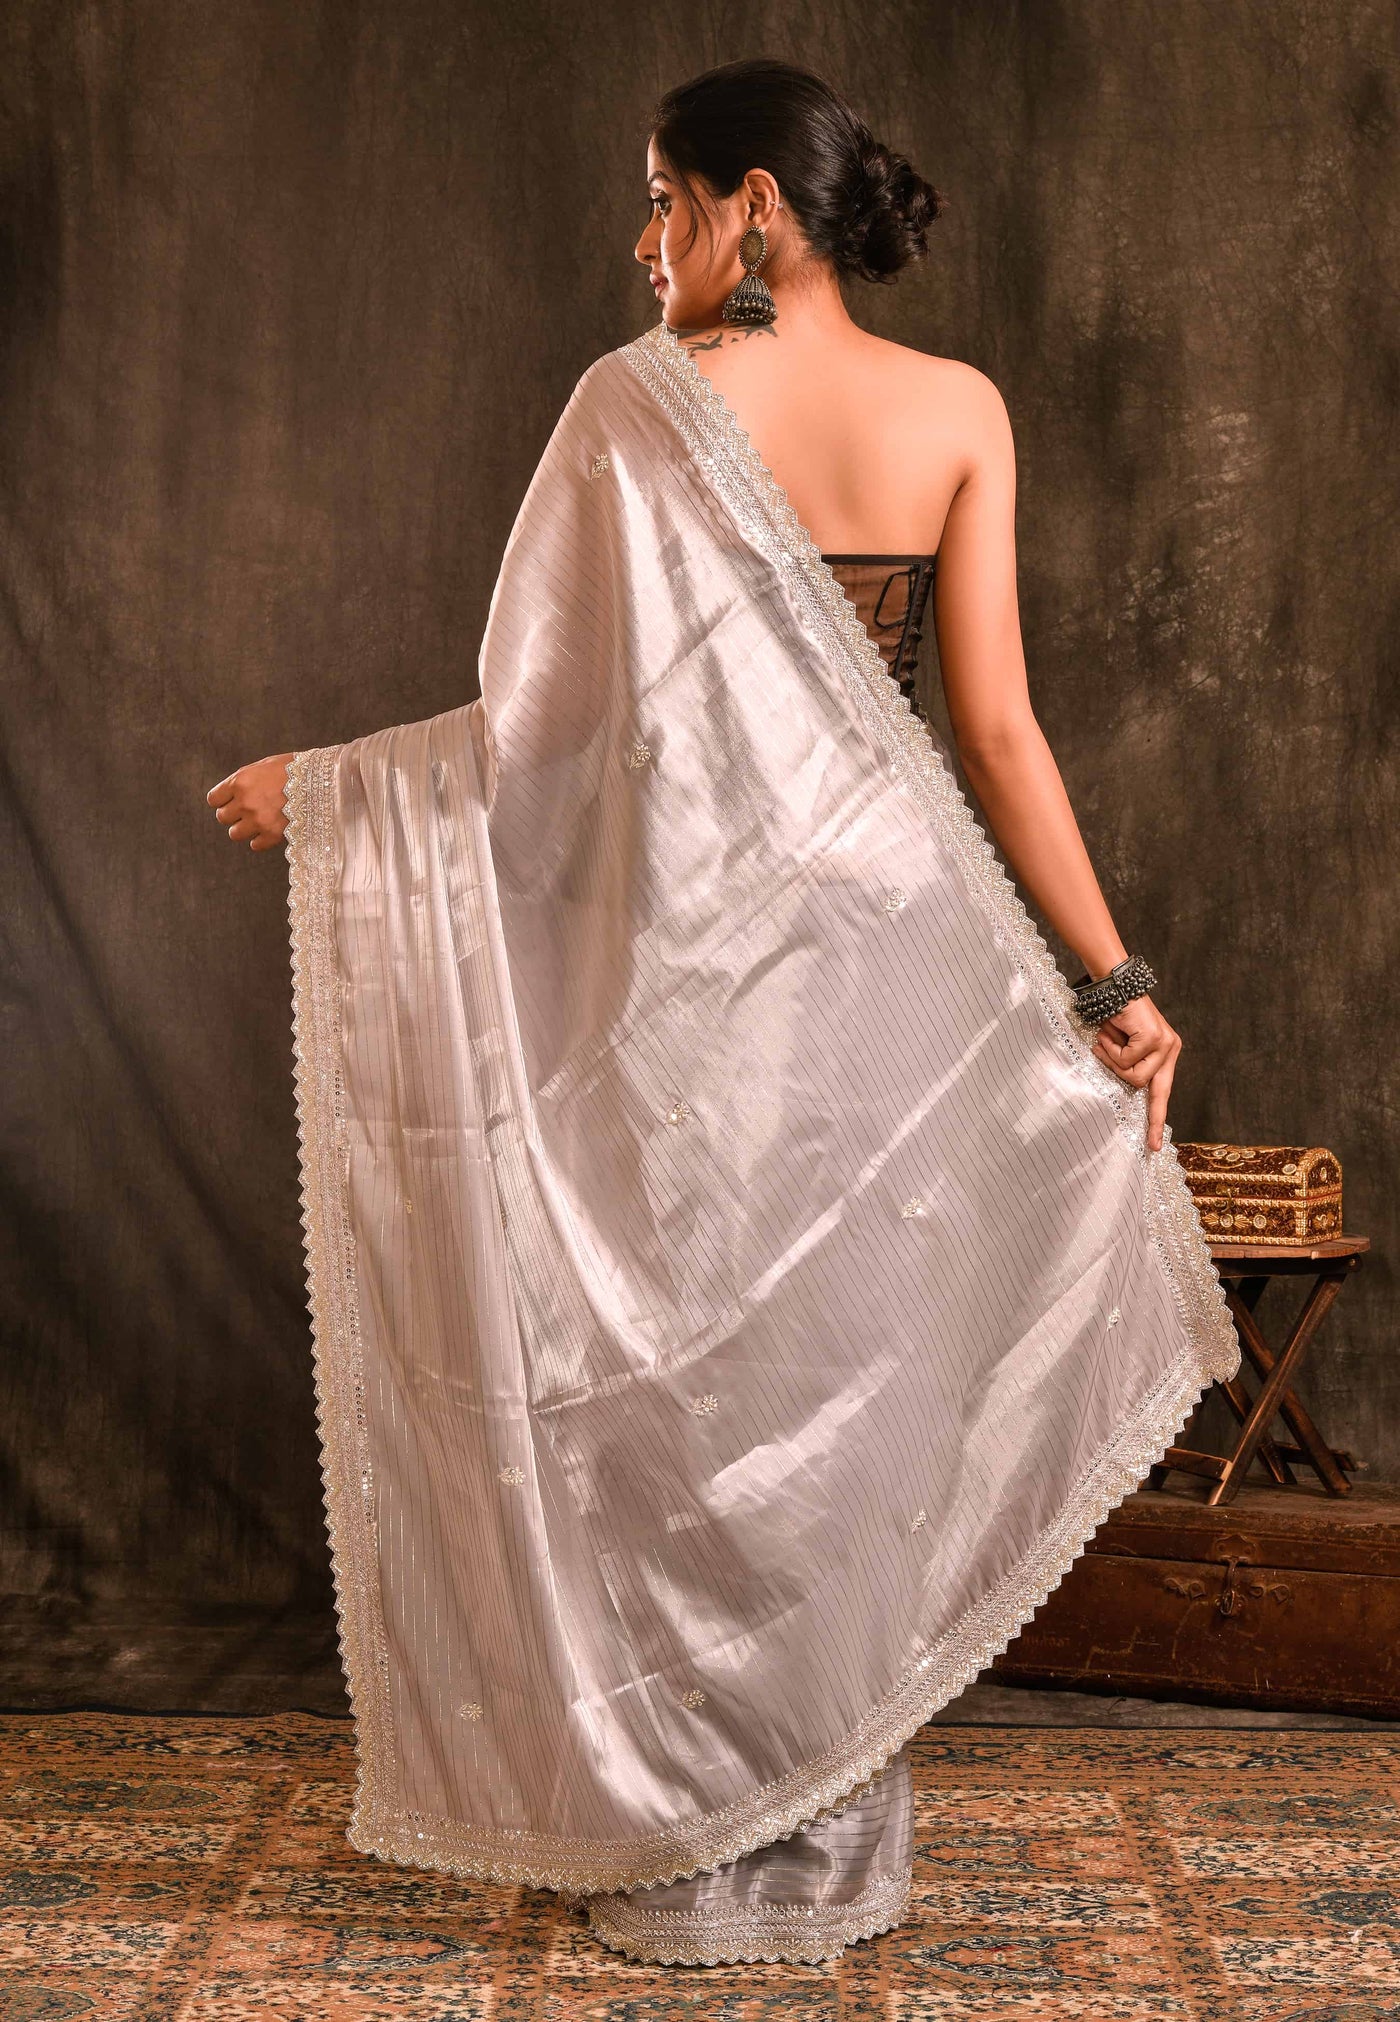 Grey Glass Tissue Embroidery Saree